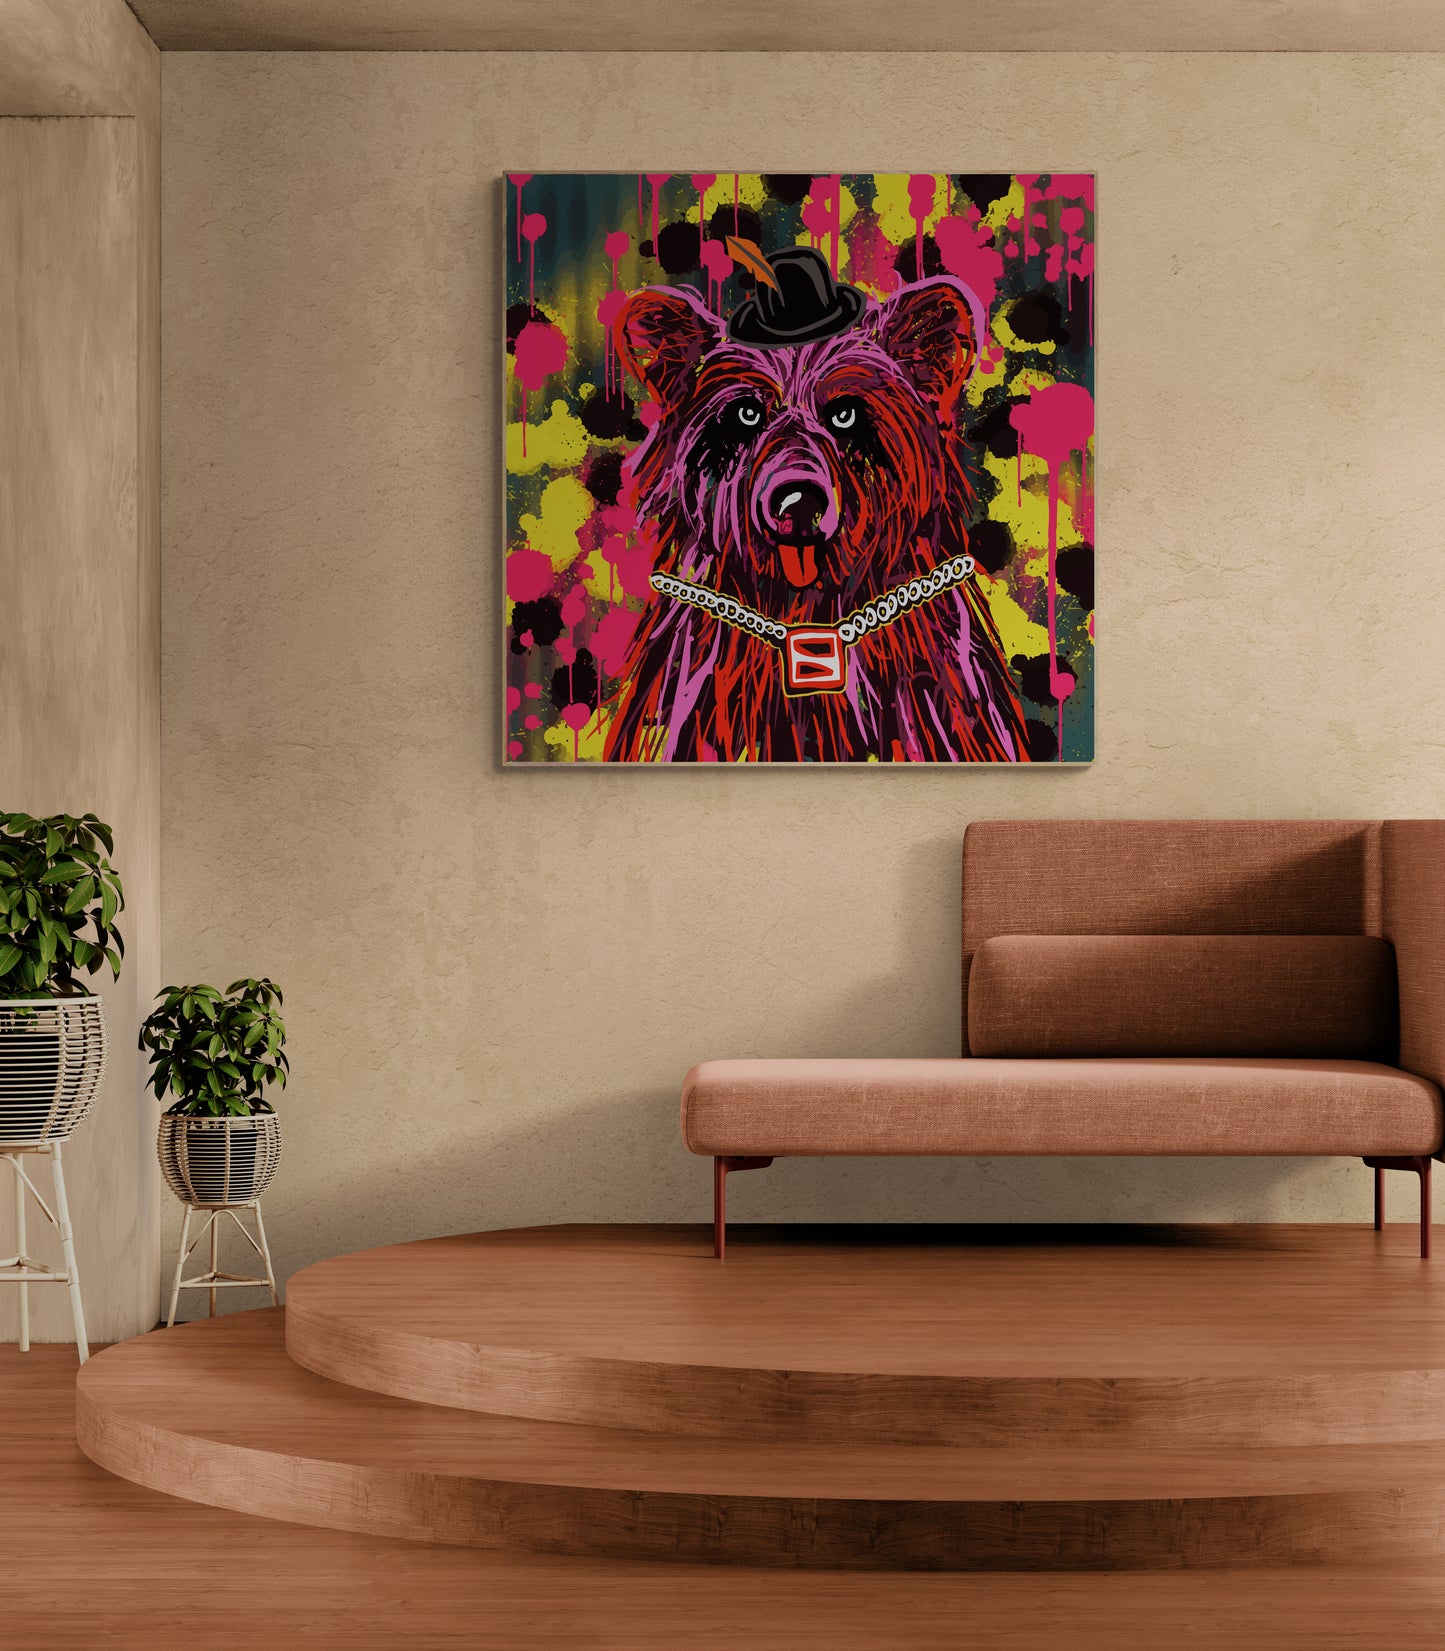 Abstract bear graphic design canvas art print with artistic finish wall art Scandinavian style